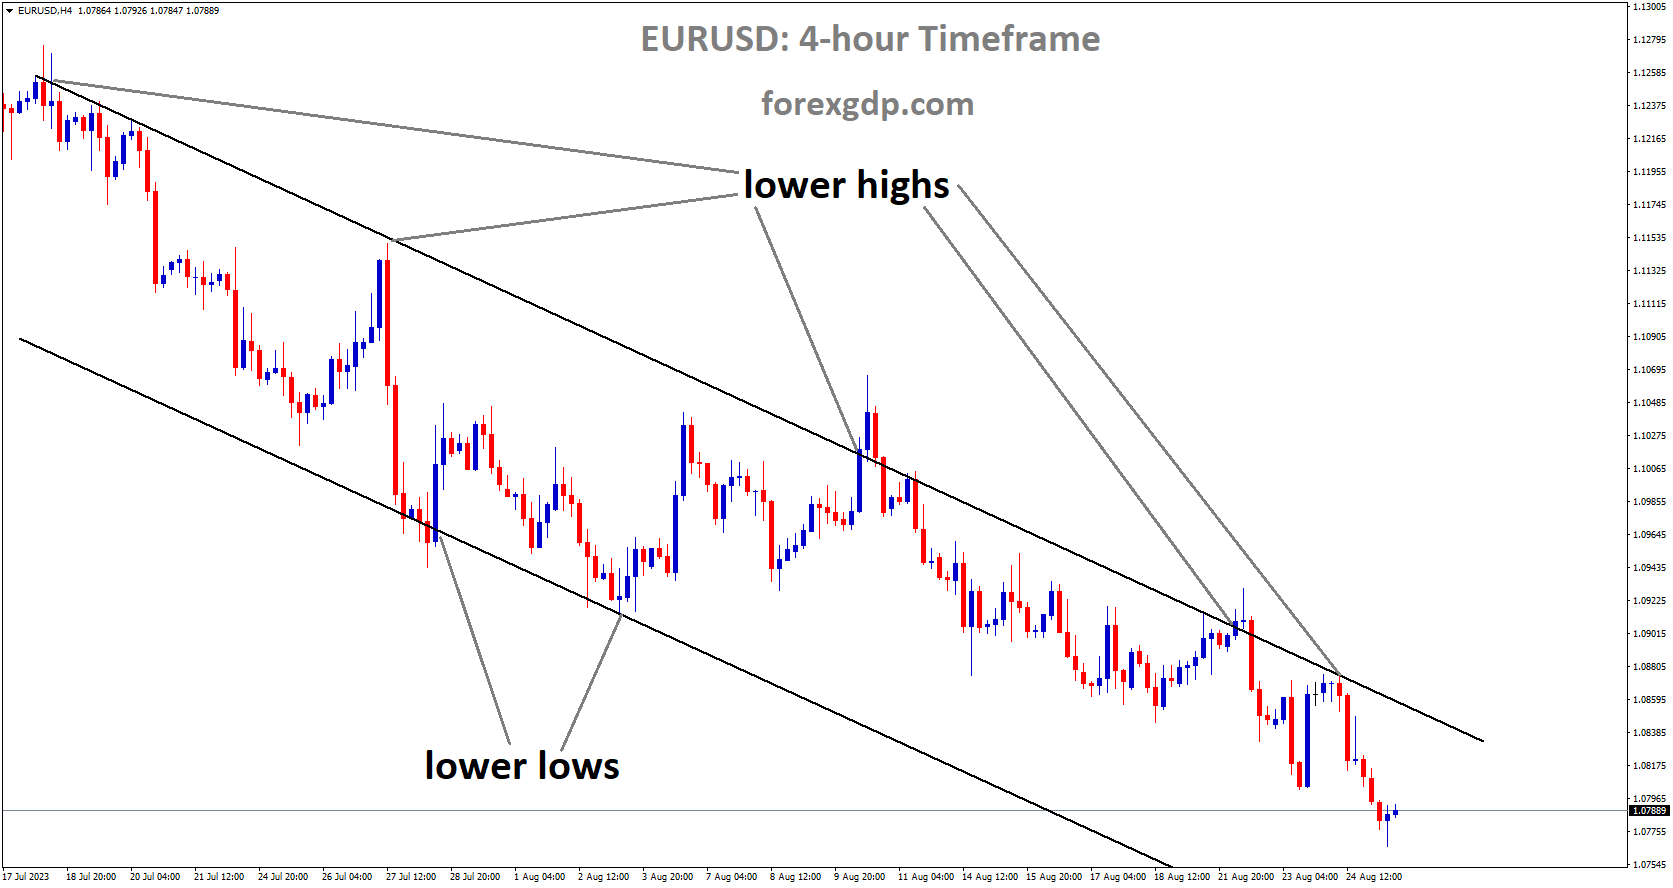 EURUSD is moving in Descending channel and market has fallen from the lower high area of the channel